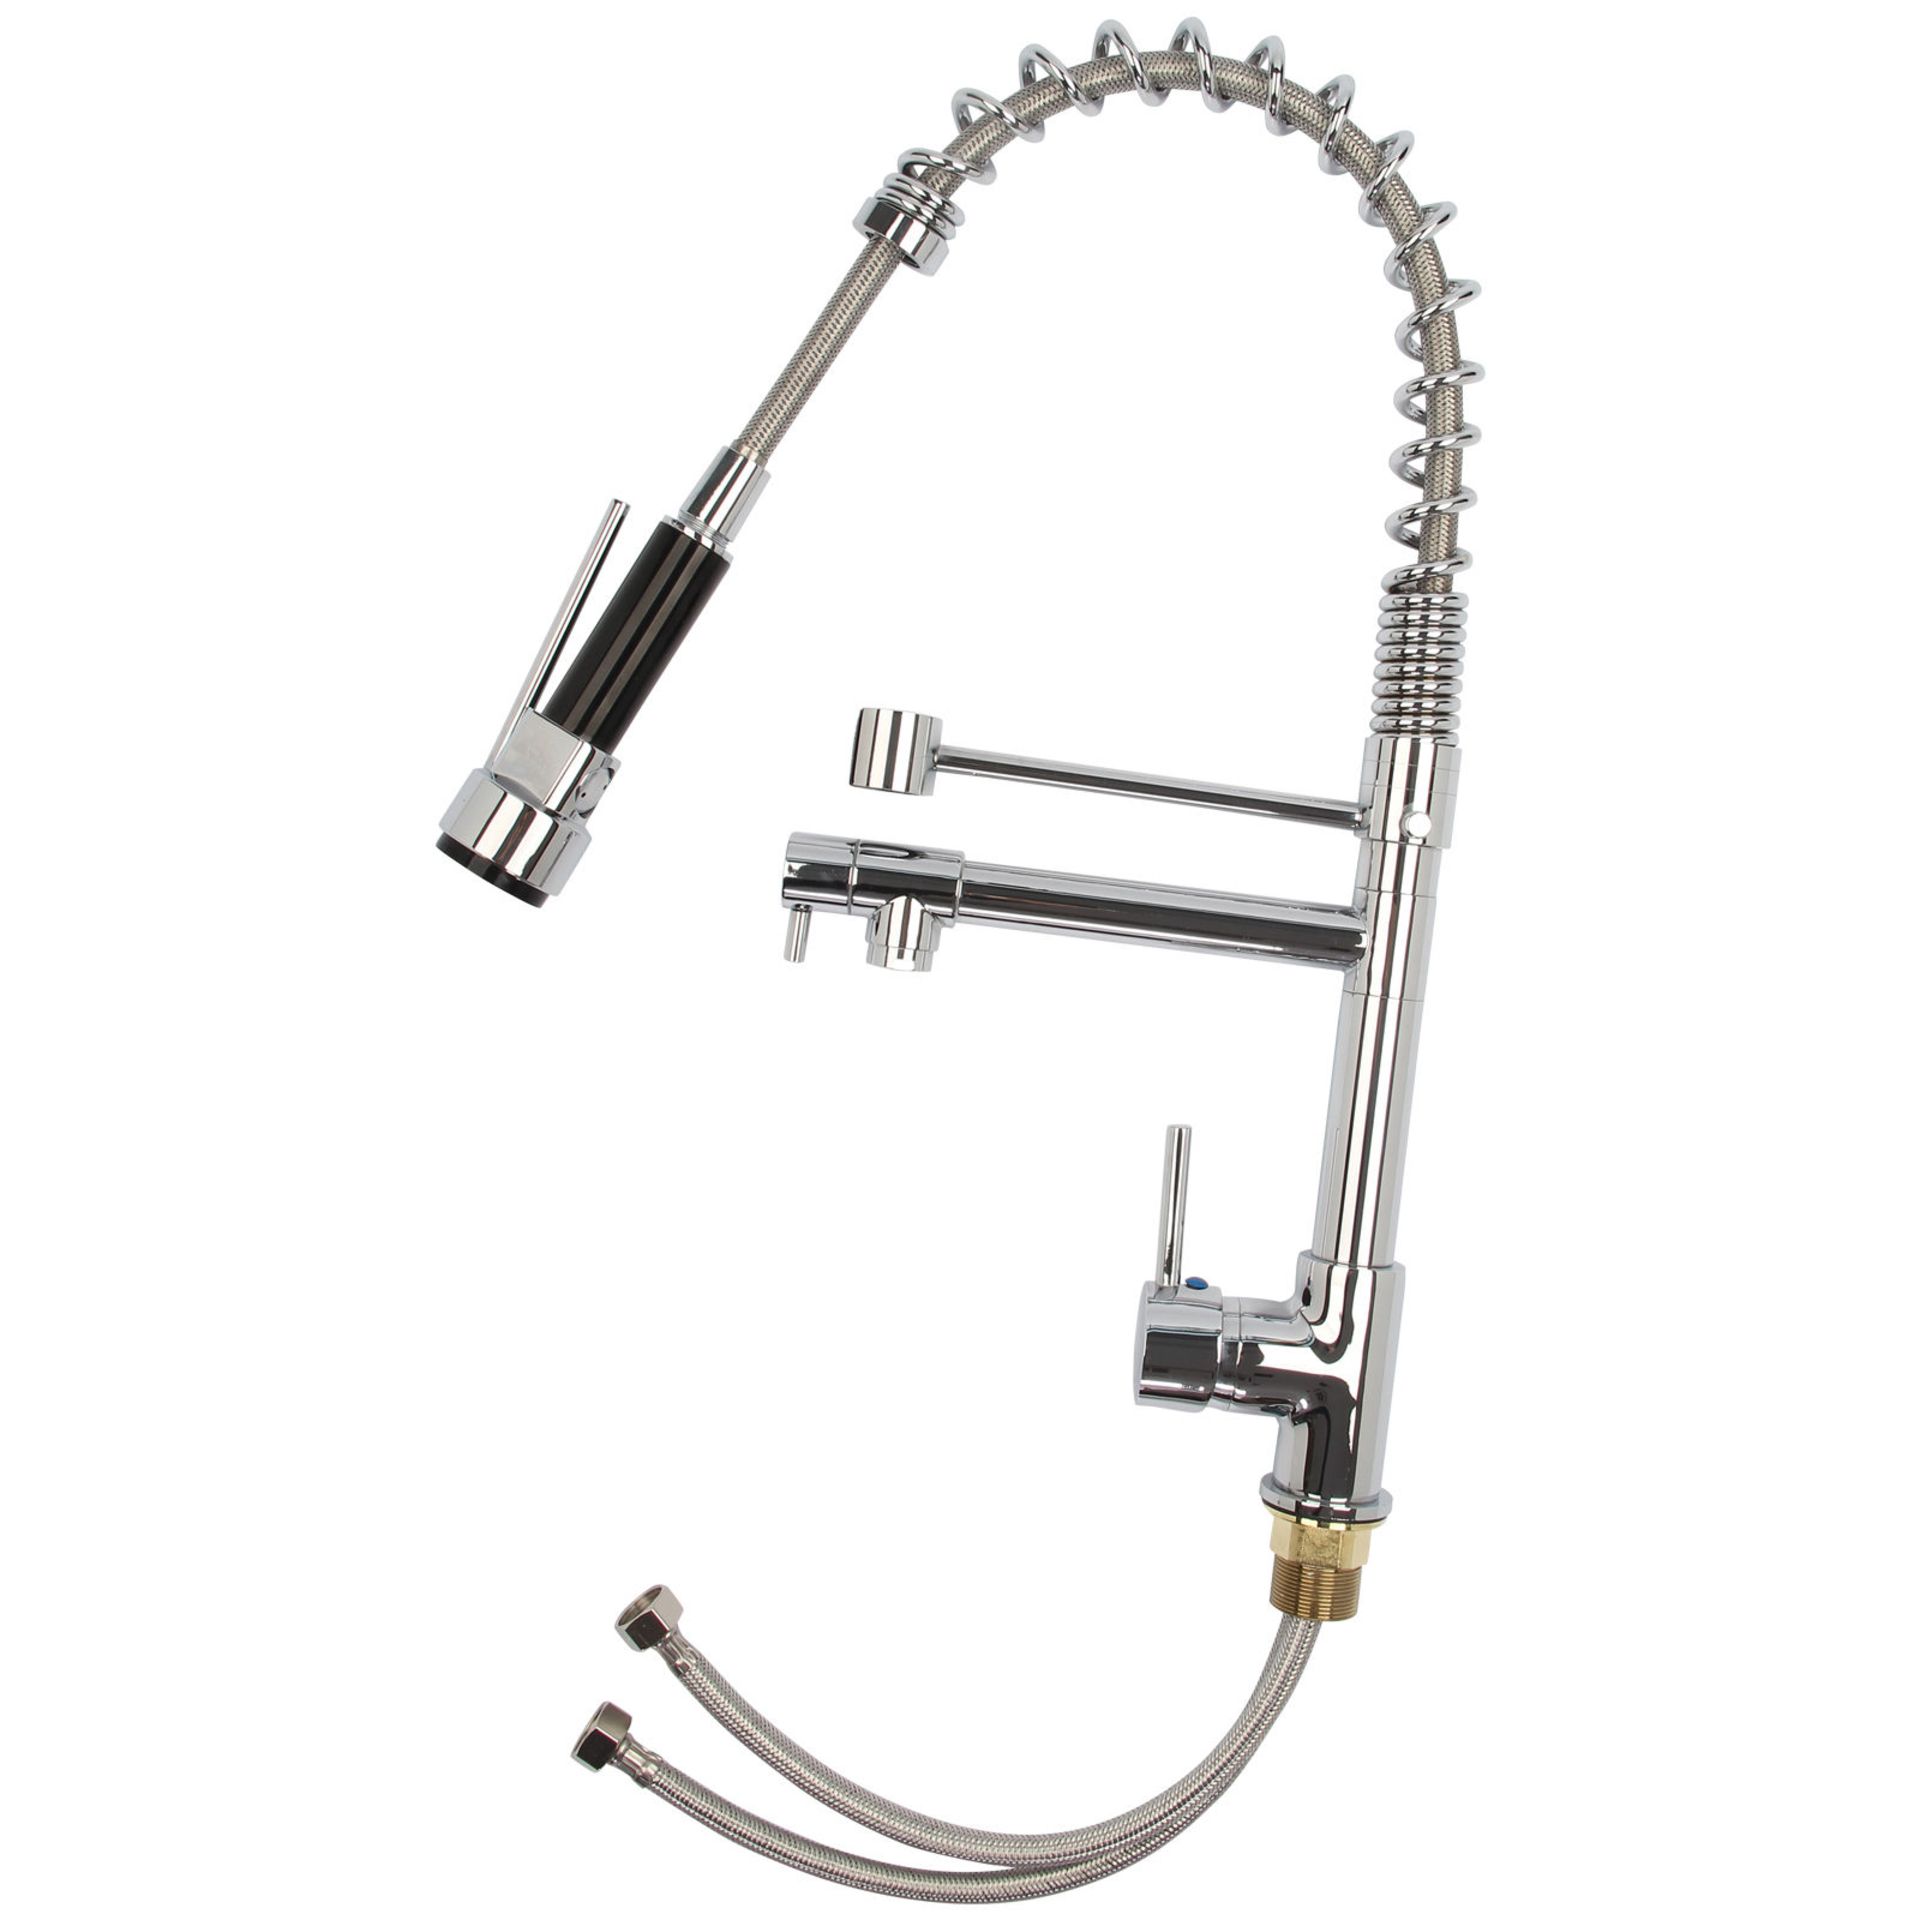 (A33) Bentley Modern Monobloc Chrome Brass Pull Out Spray Mixer Tap. RRP £349.99. This tap is from - Image 2 of 6